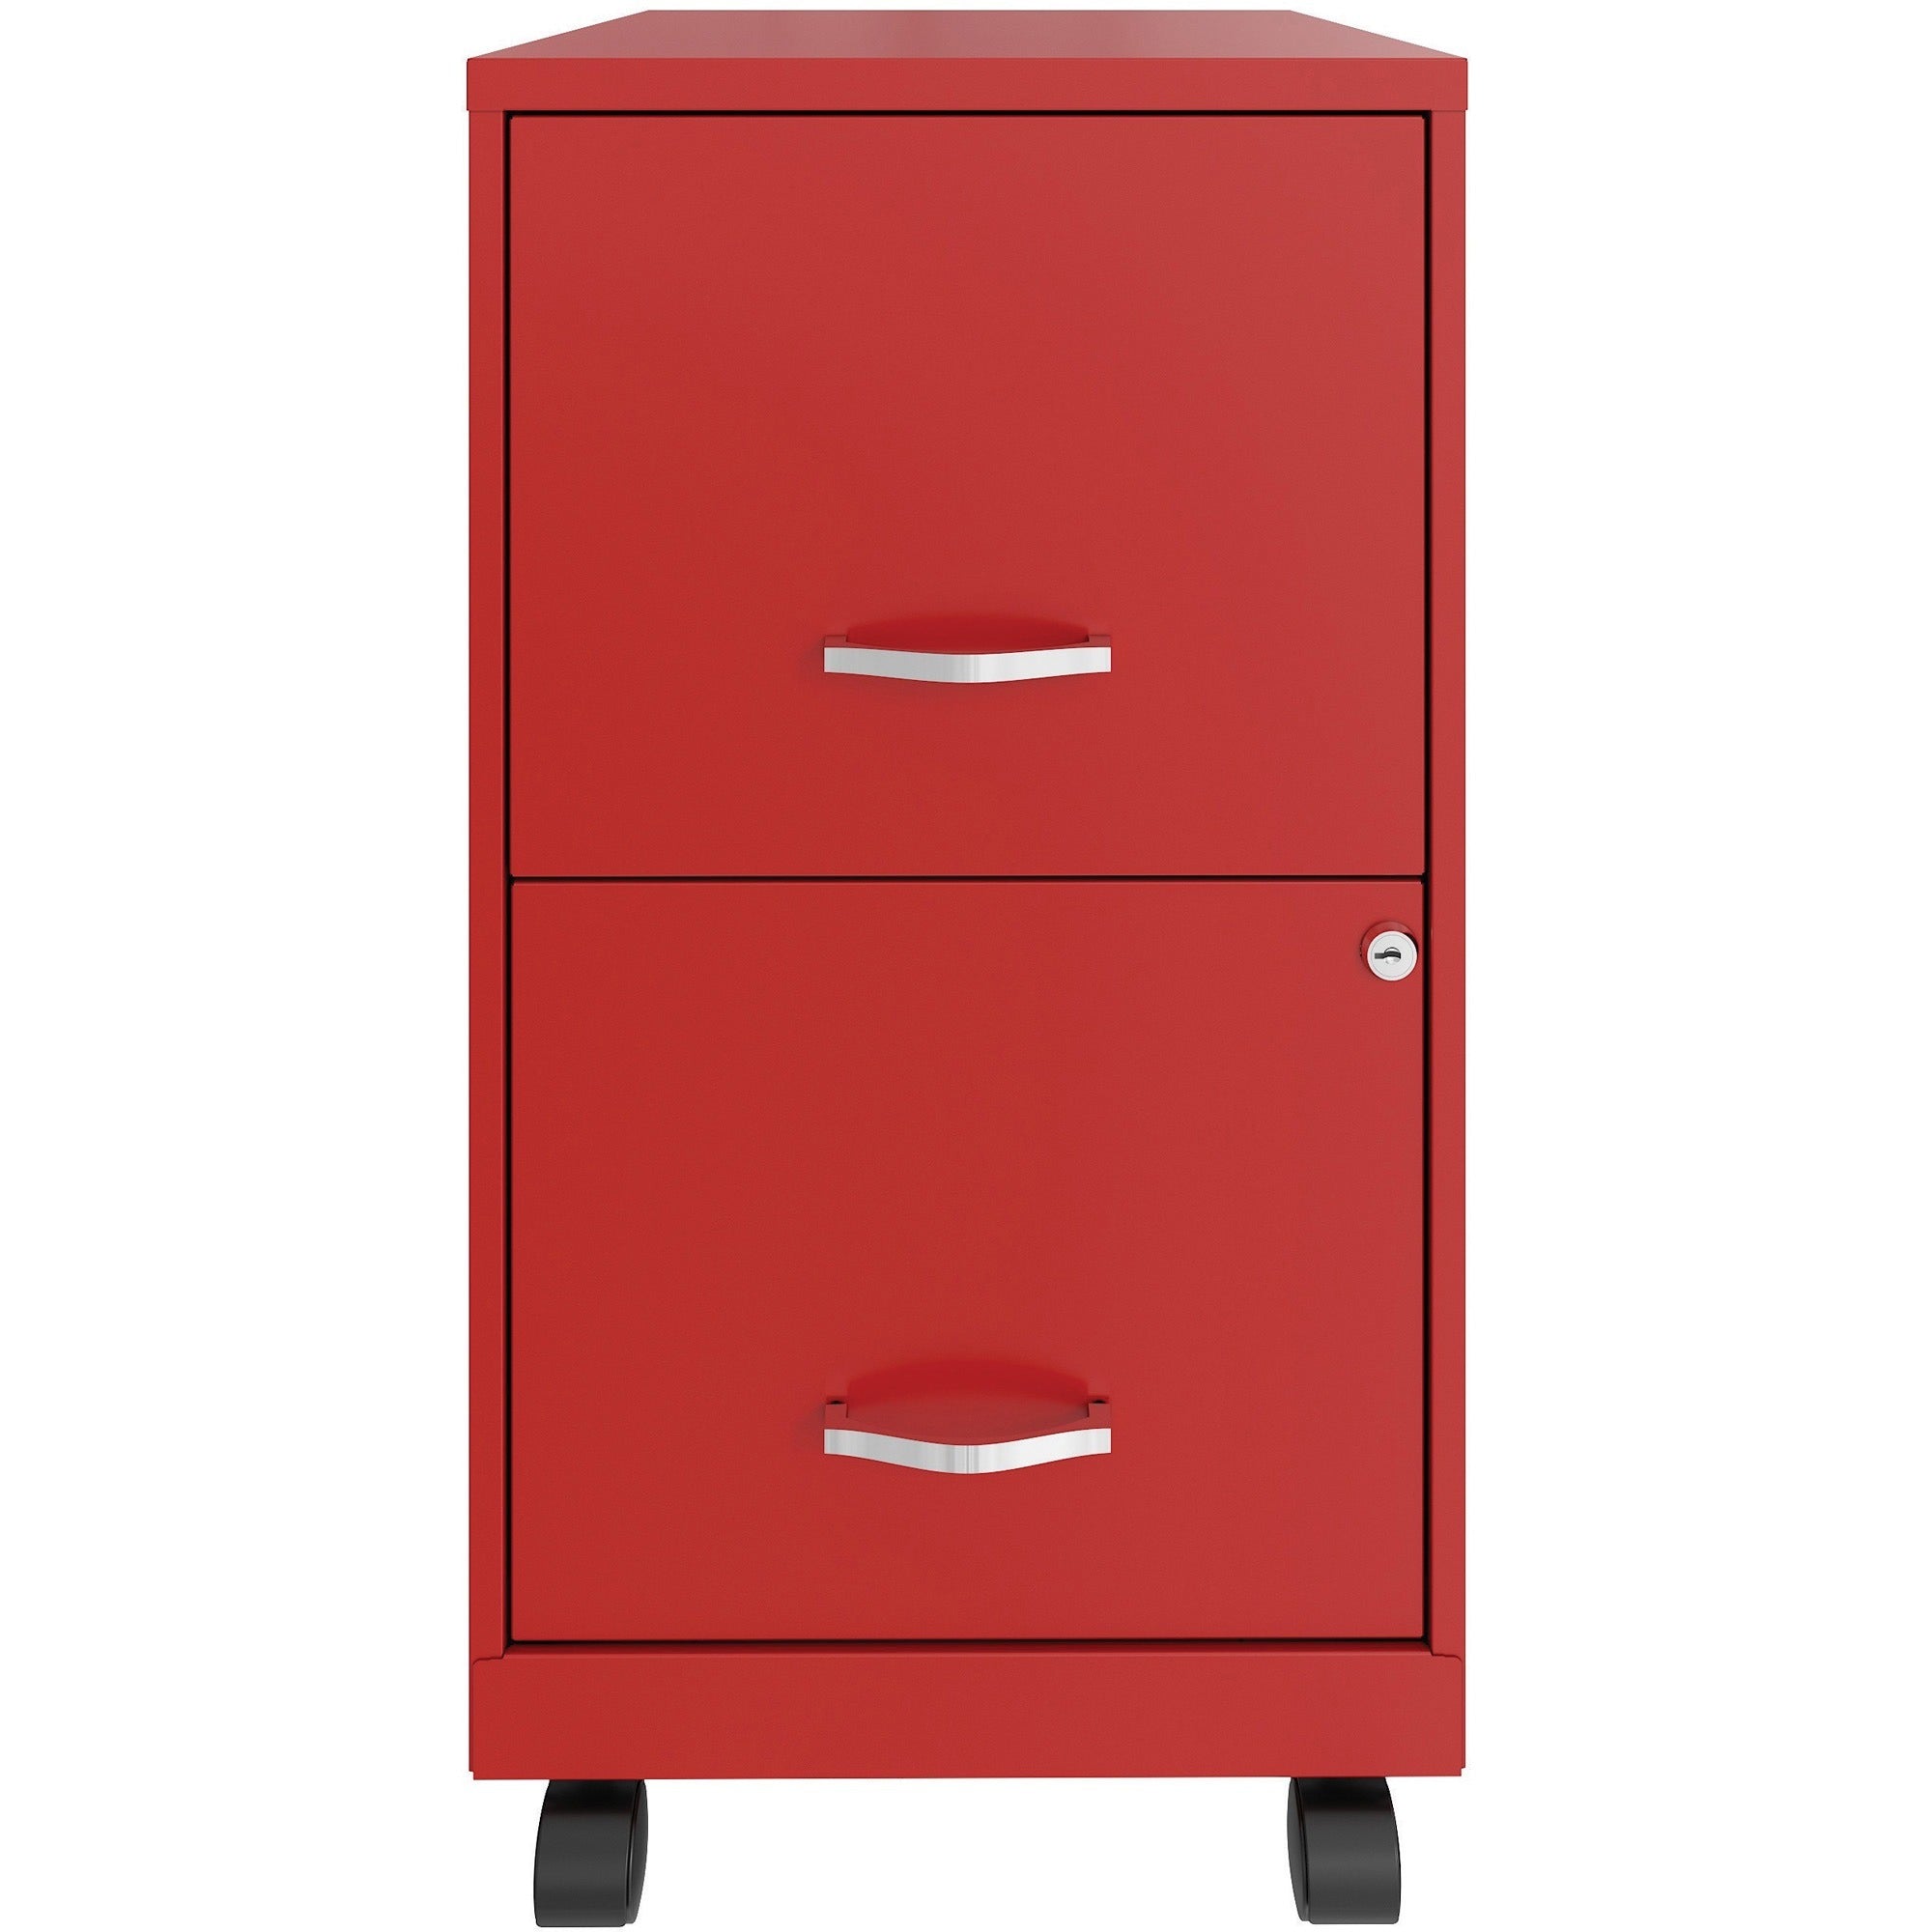 nusparc-mobile-file-cabinet-142-x-18-x-265-for-file-letter-mobility-locking-drawer-glide-suspension-3-4-drawer-extension-cam-lock-nonporous-surface-red-painted-steel-steel-recycled-assembly-required_nprvf218amrd - 2